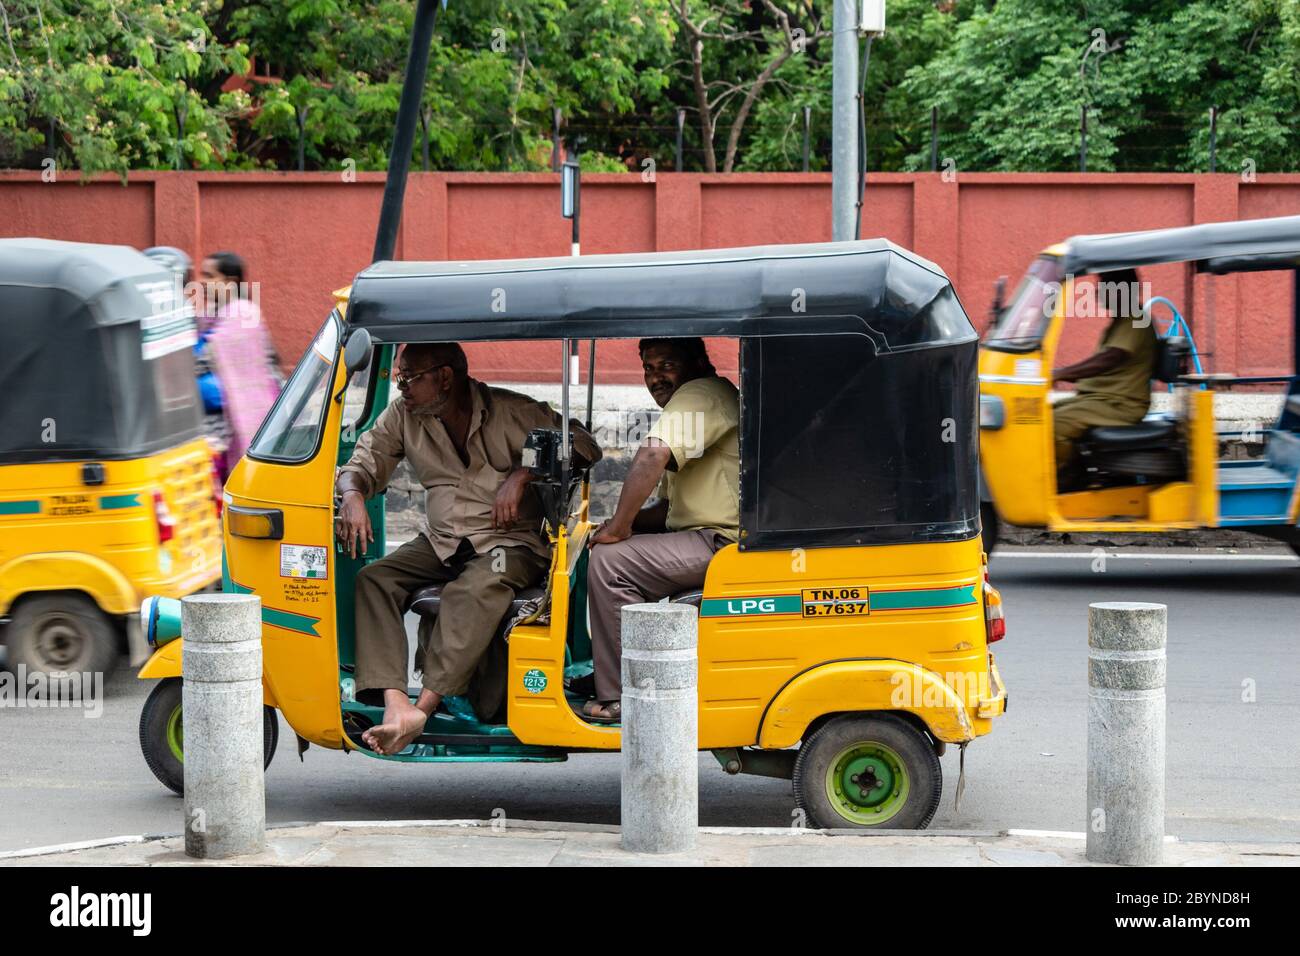 Chennai, Tamil Nadu, India - August 2018: Two auto rickshaw drivers idling inside a vehicle parked by the roadside. Stock Photo